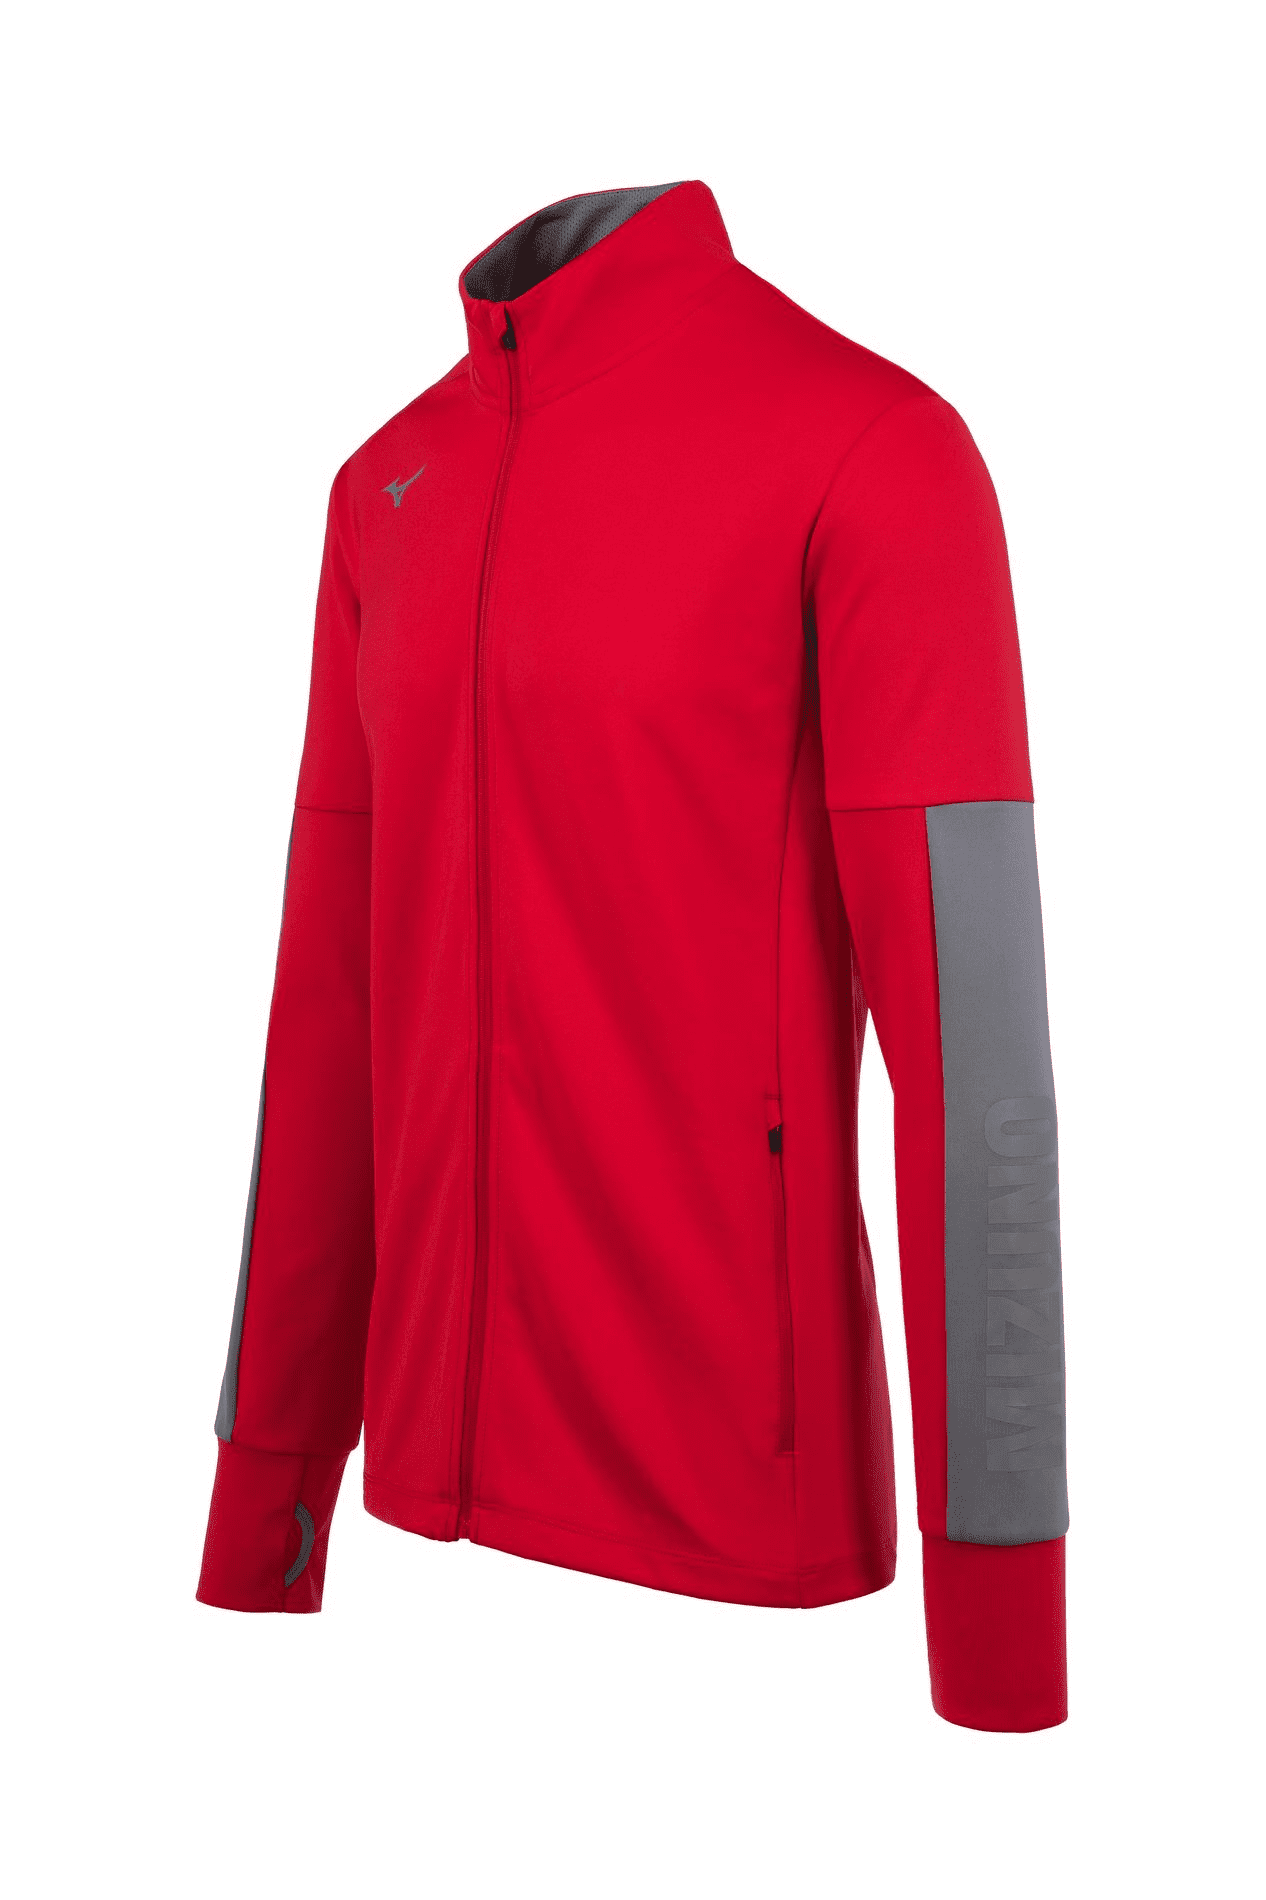 Mizuno Men's Alpha Quest Jacket, Size Extra Small, Red-Shade (109I)